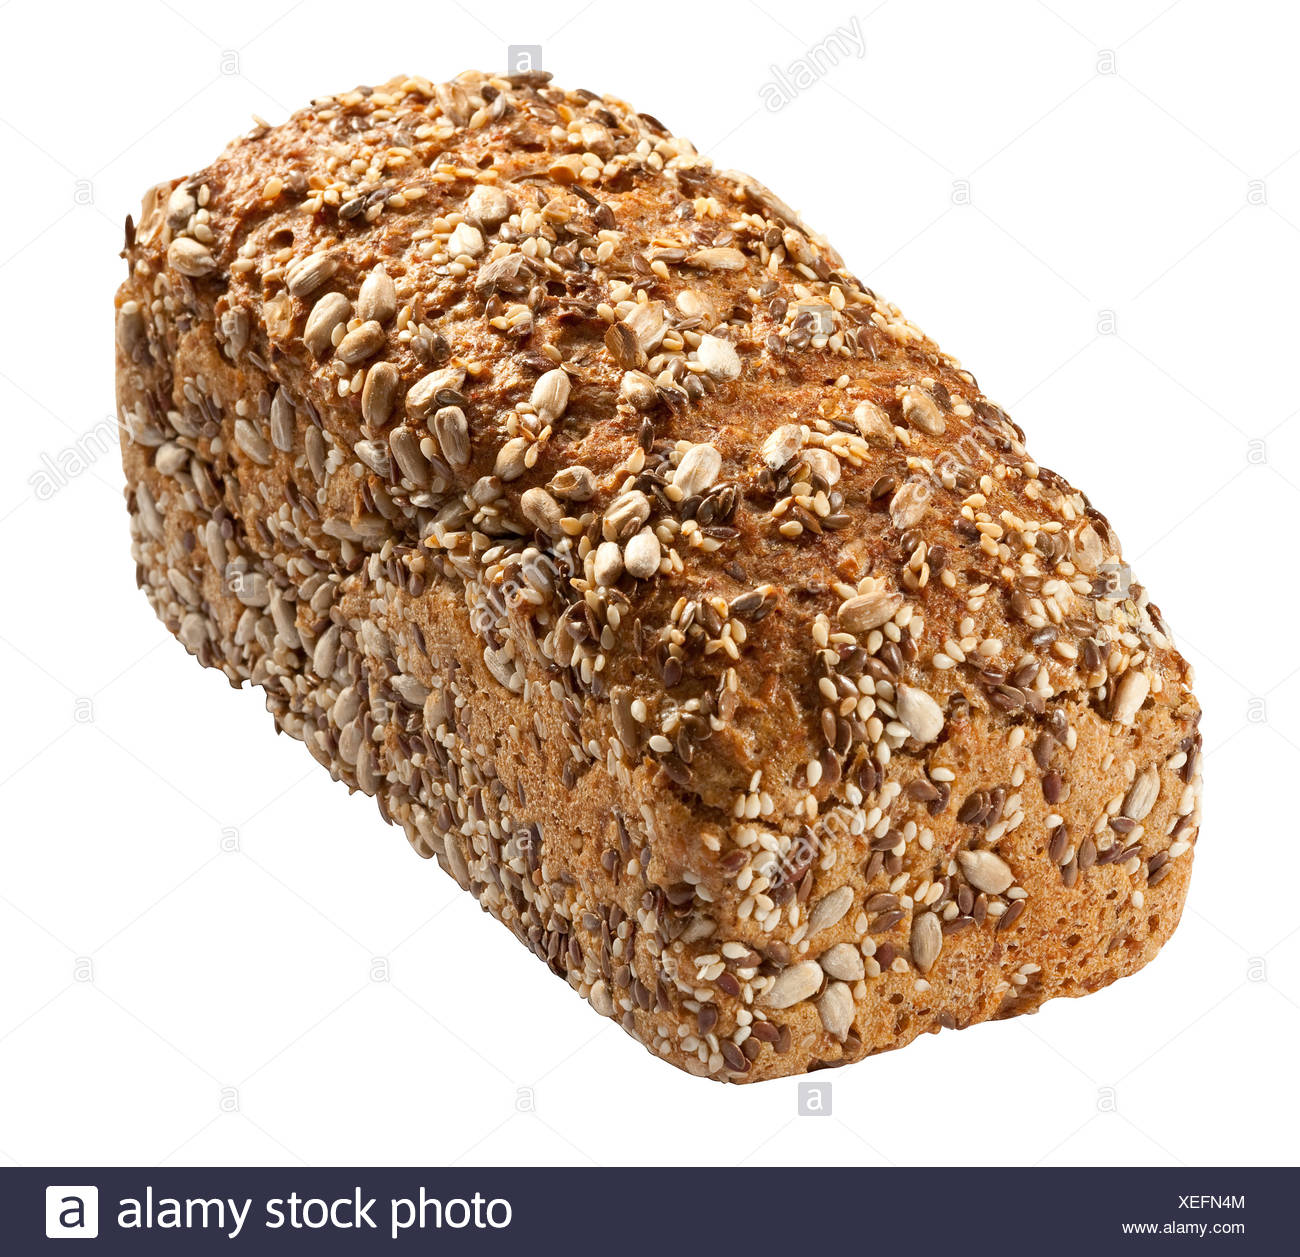 Whole Grain Bread Germany High Resolution Stock Photography And Images Alamy